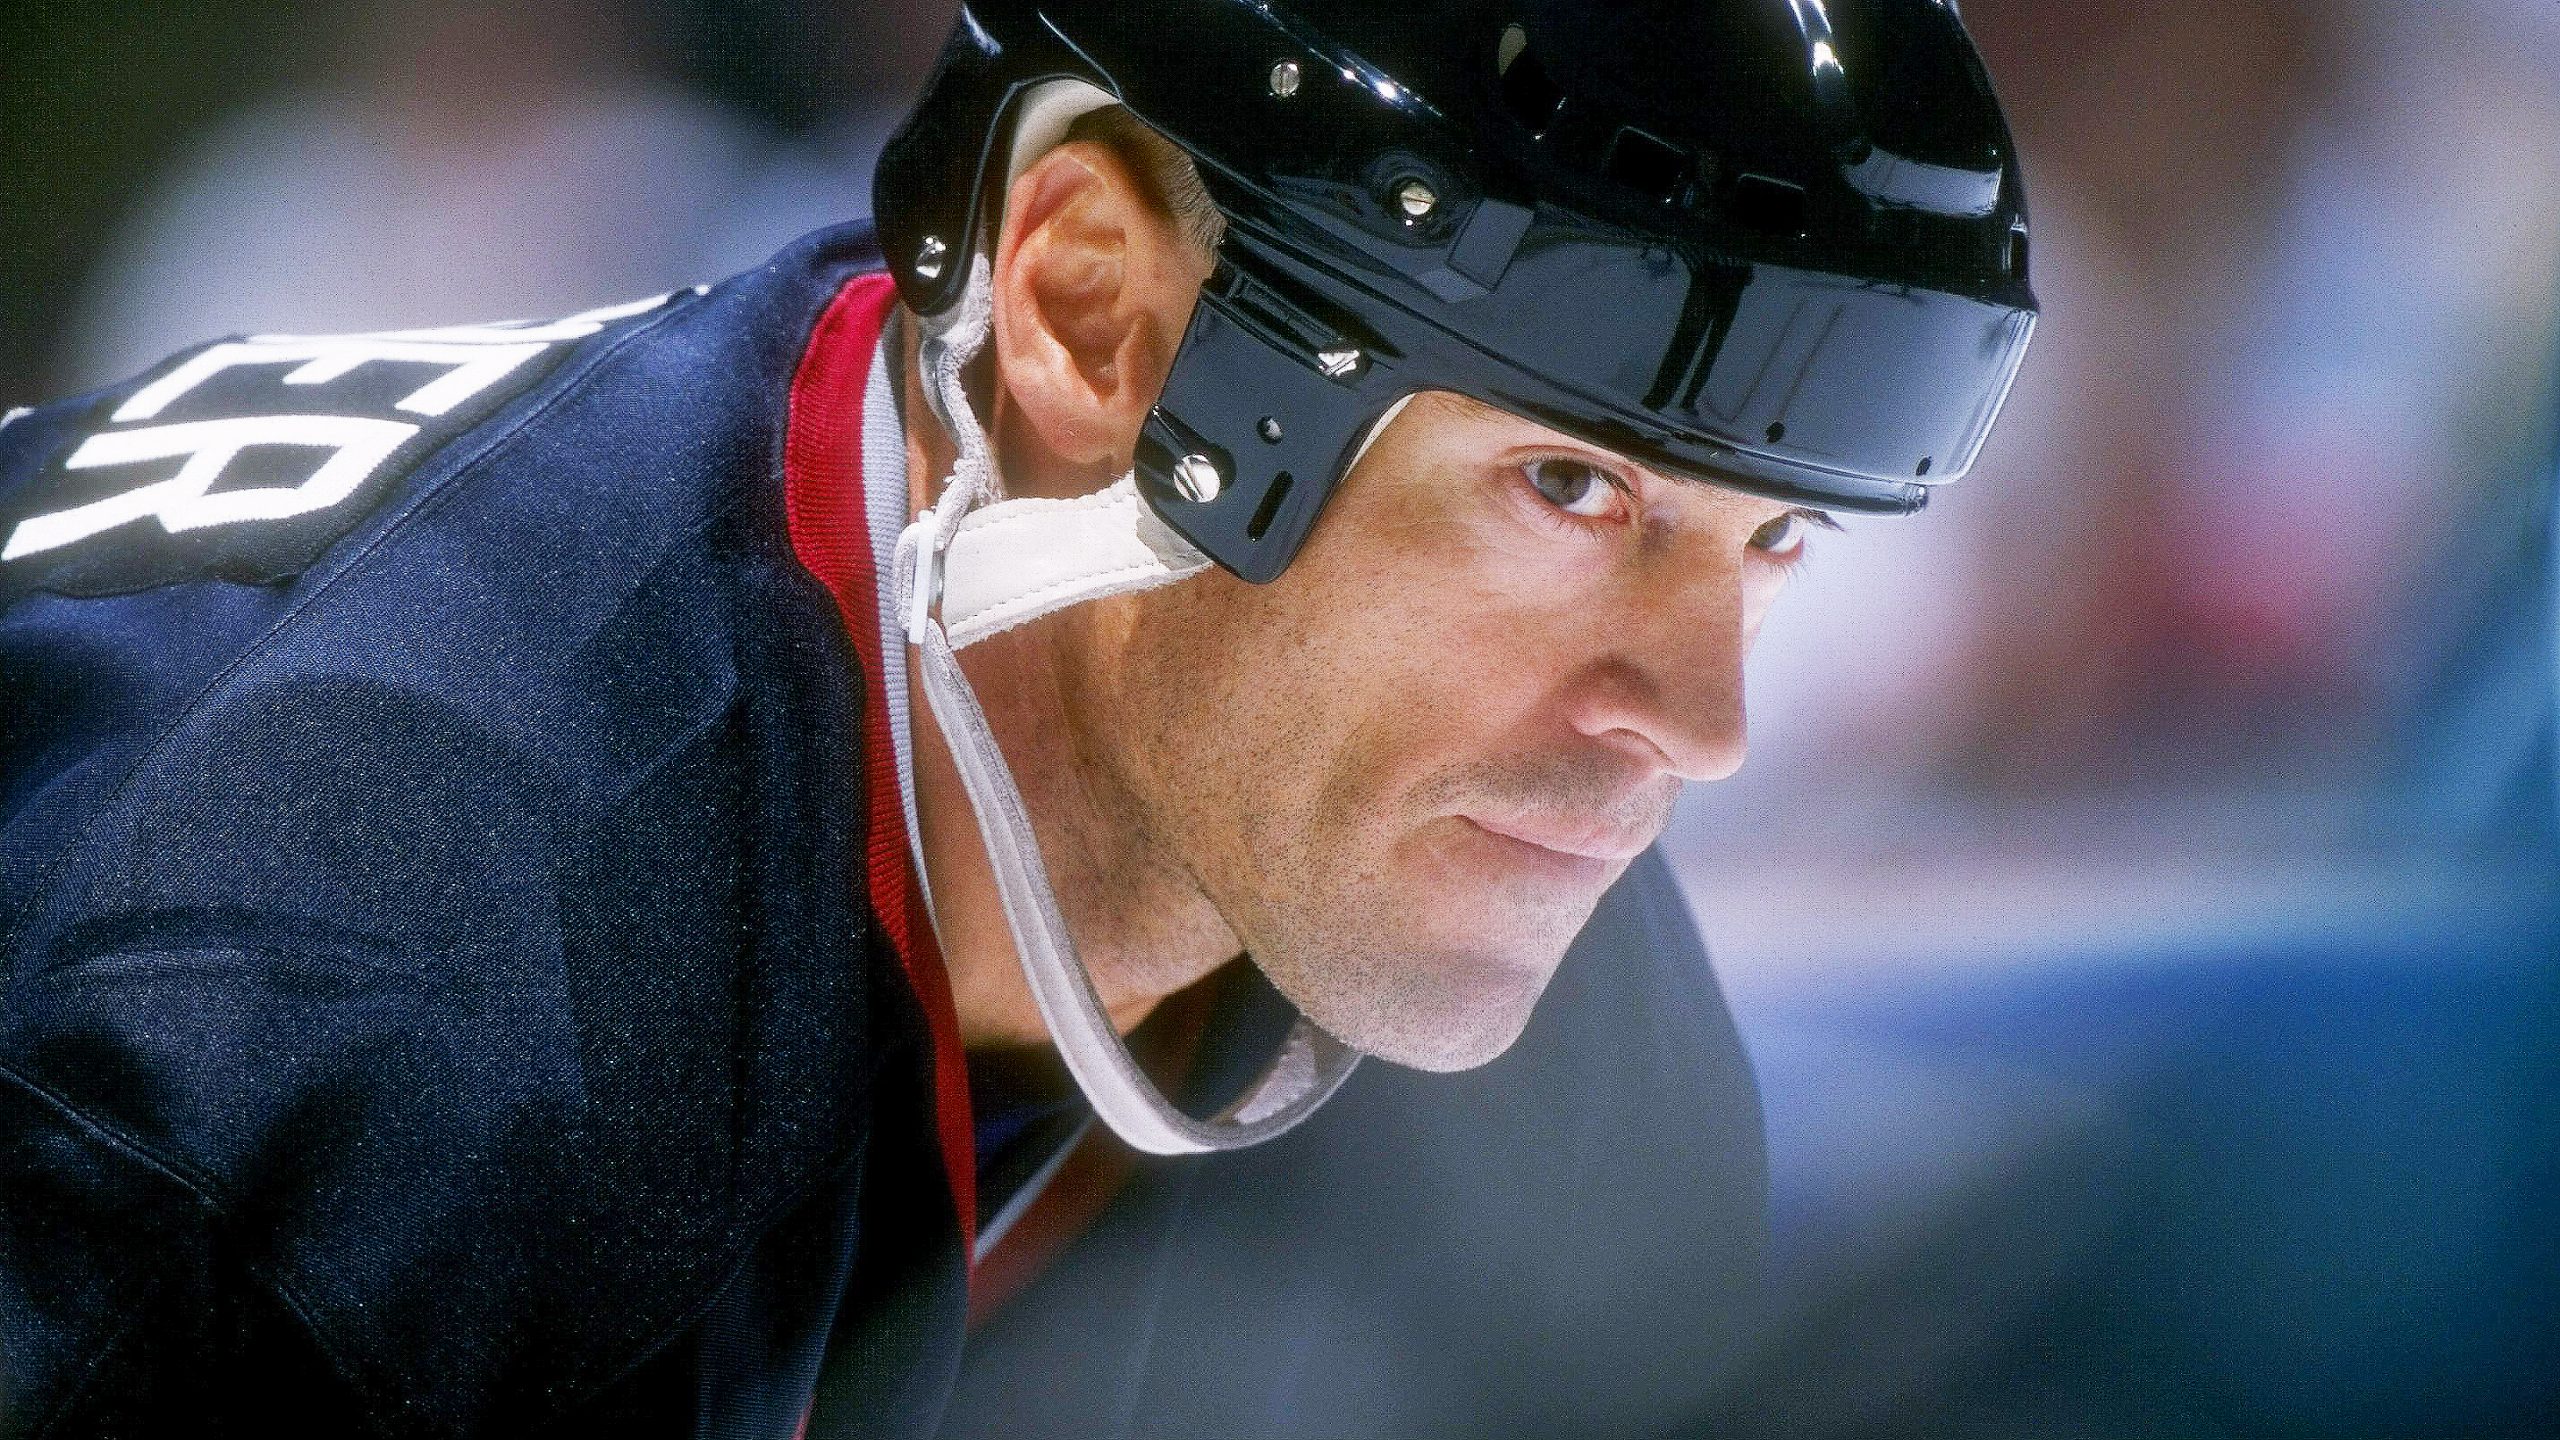 DECEMBER 15th 2020: NHL legend Mark Messier has filed a lawsuit after  losing a $500,000 investment. Messier claims that Destiny Bioscience, an  Alberta, Canada based cannabis company, used his celebrity status to